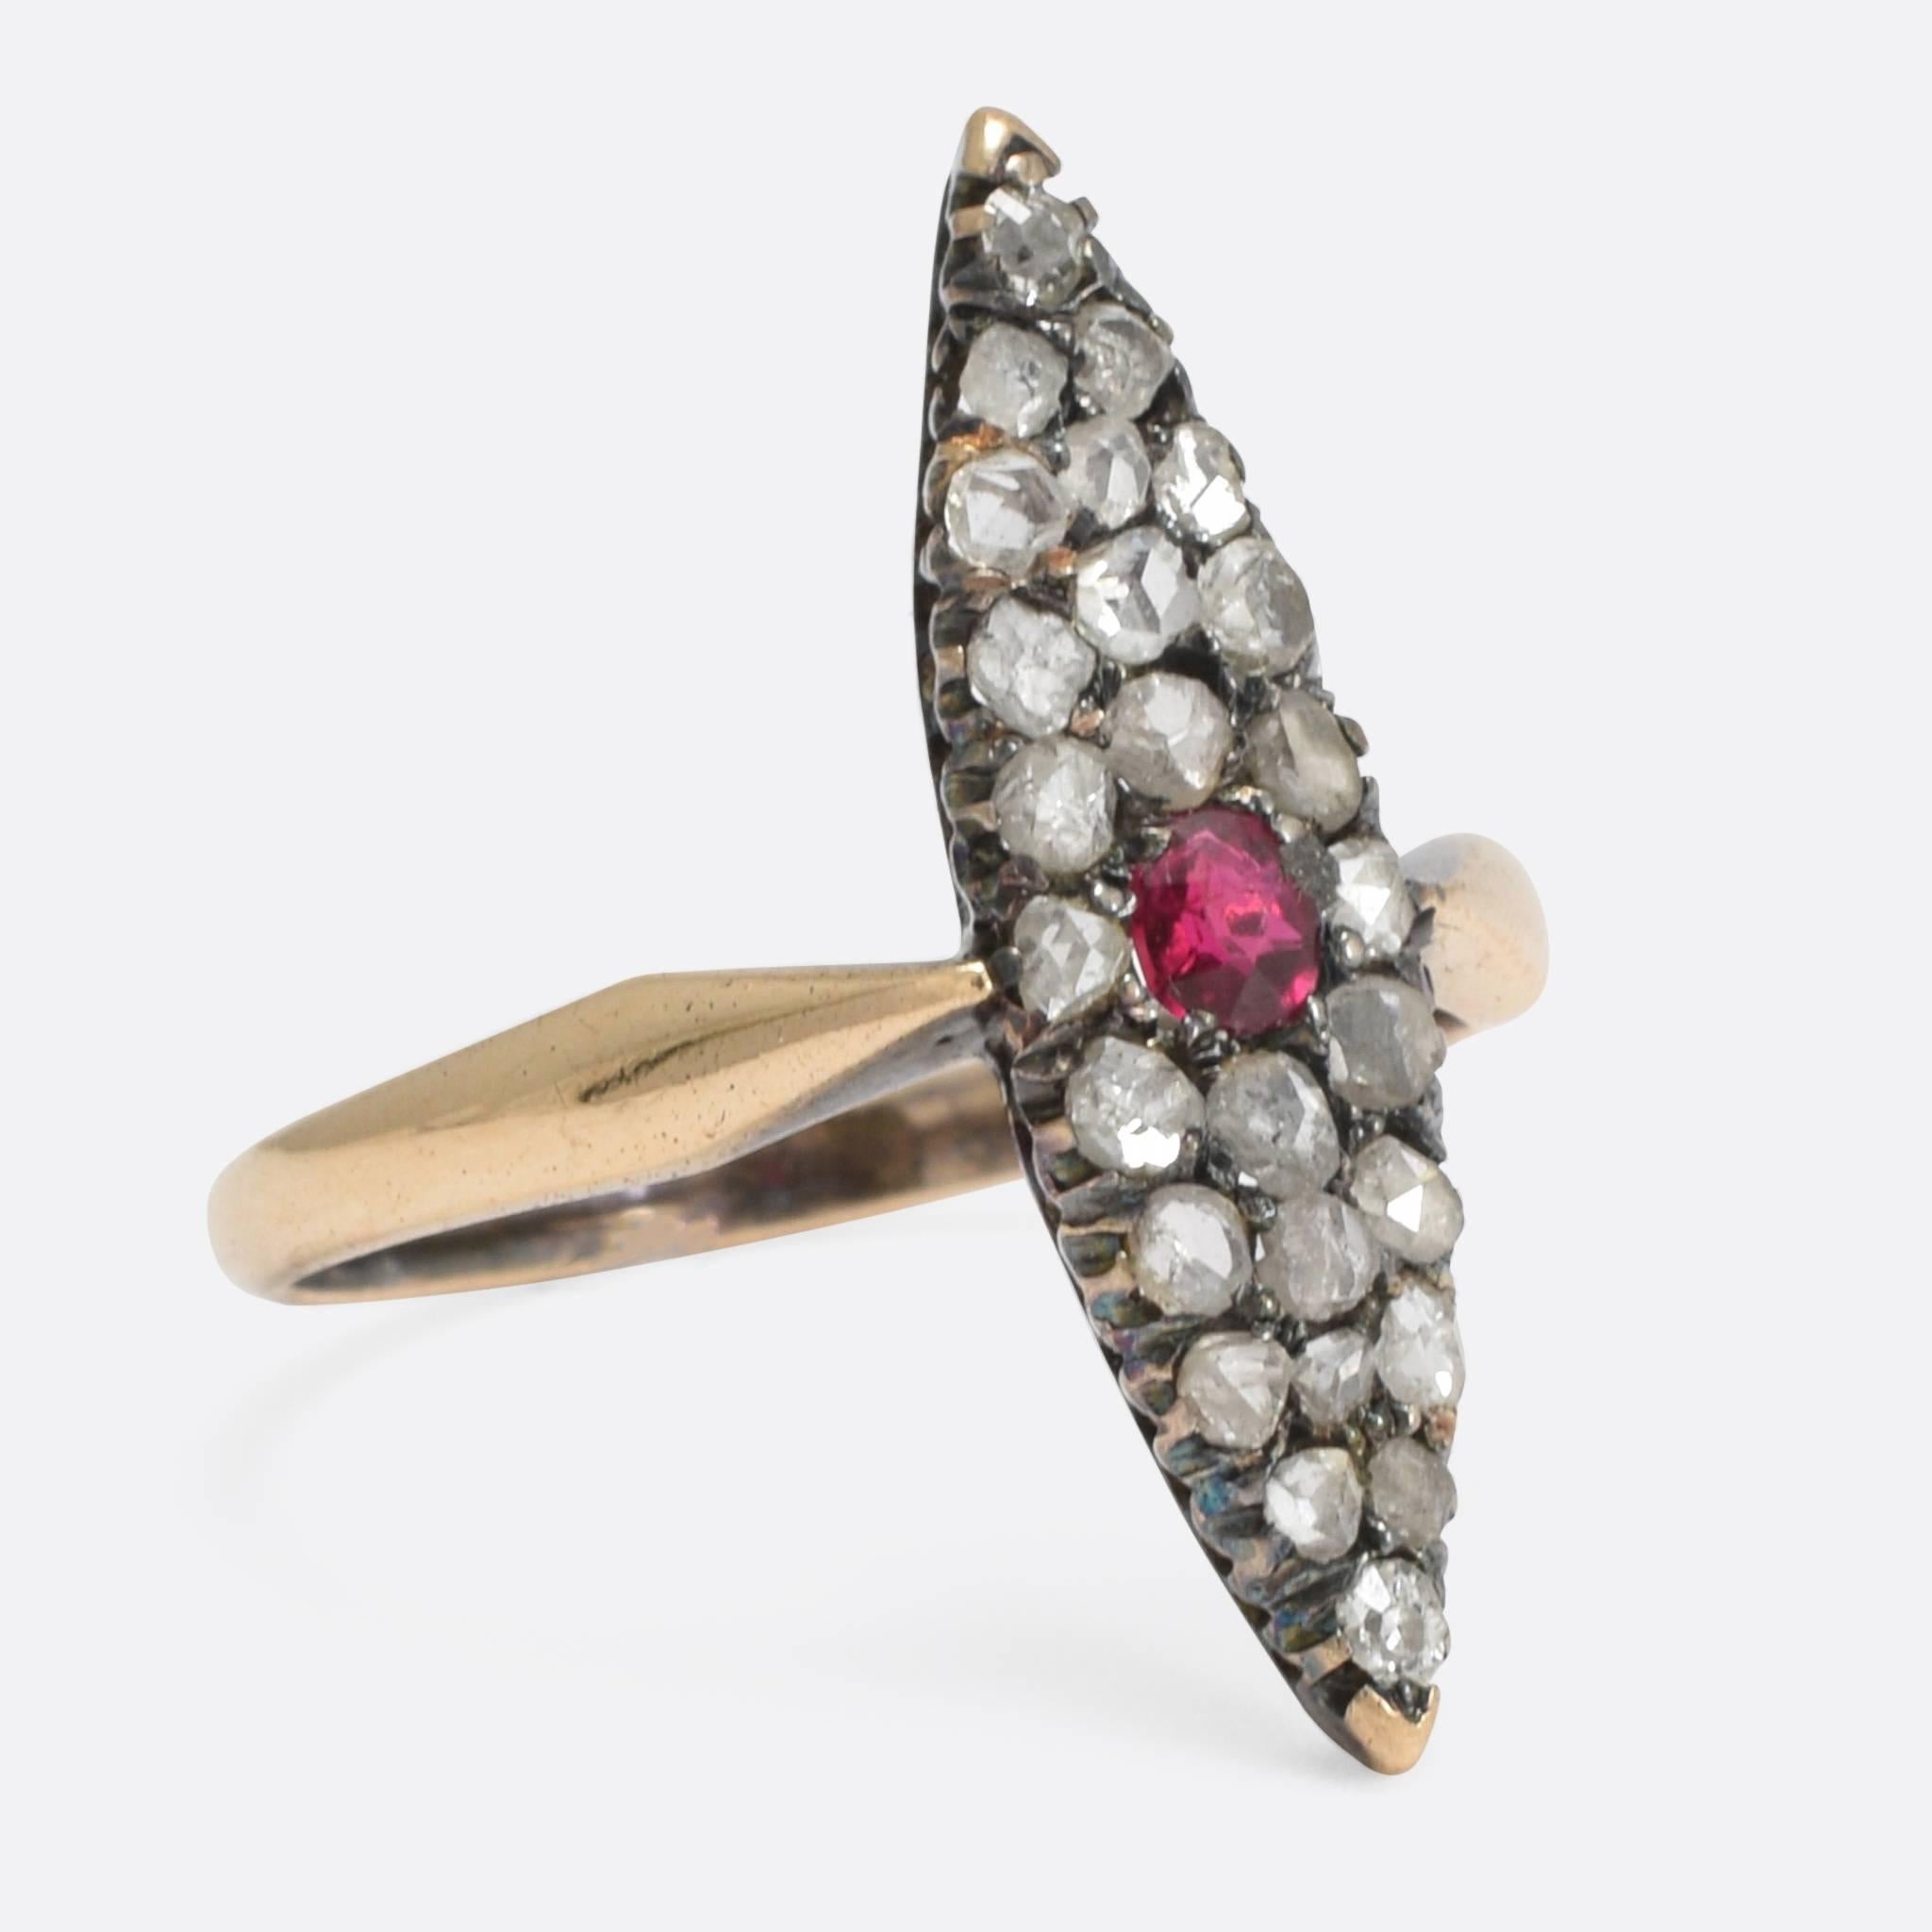 The cool antique cluster ring has a pointed marquise-shape head, fully set with rose cut diamonds and a vibrant central ruby. It's modelled in 15k yellow gold, with delicate claw settings and shapley pinched shoulders. An elegant ring, that has